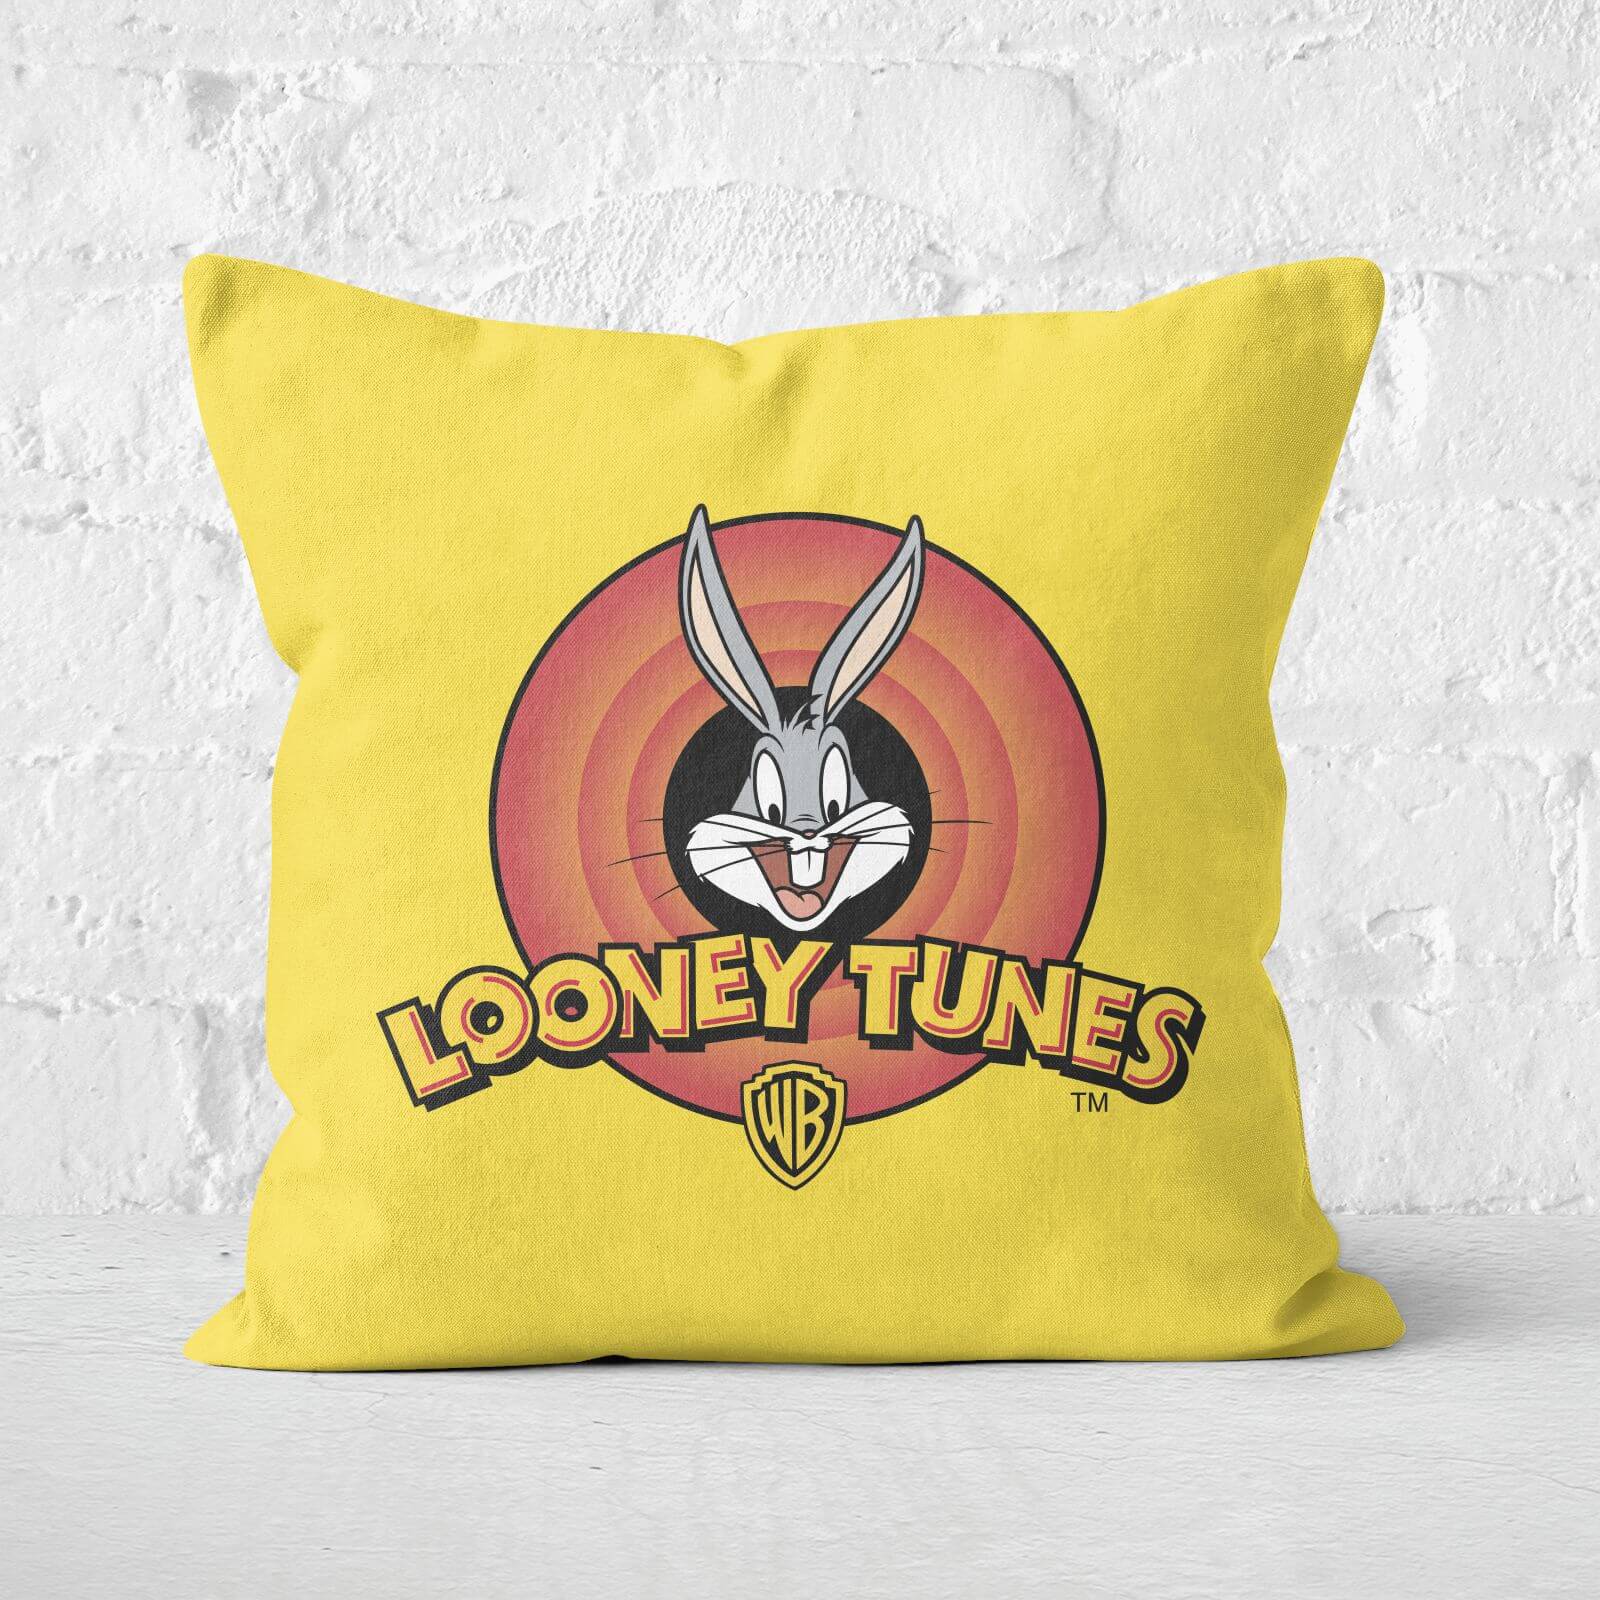 Looney Tunes Square Cushion - 50x50cm - Soft Touch